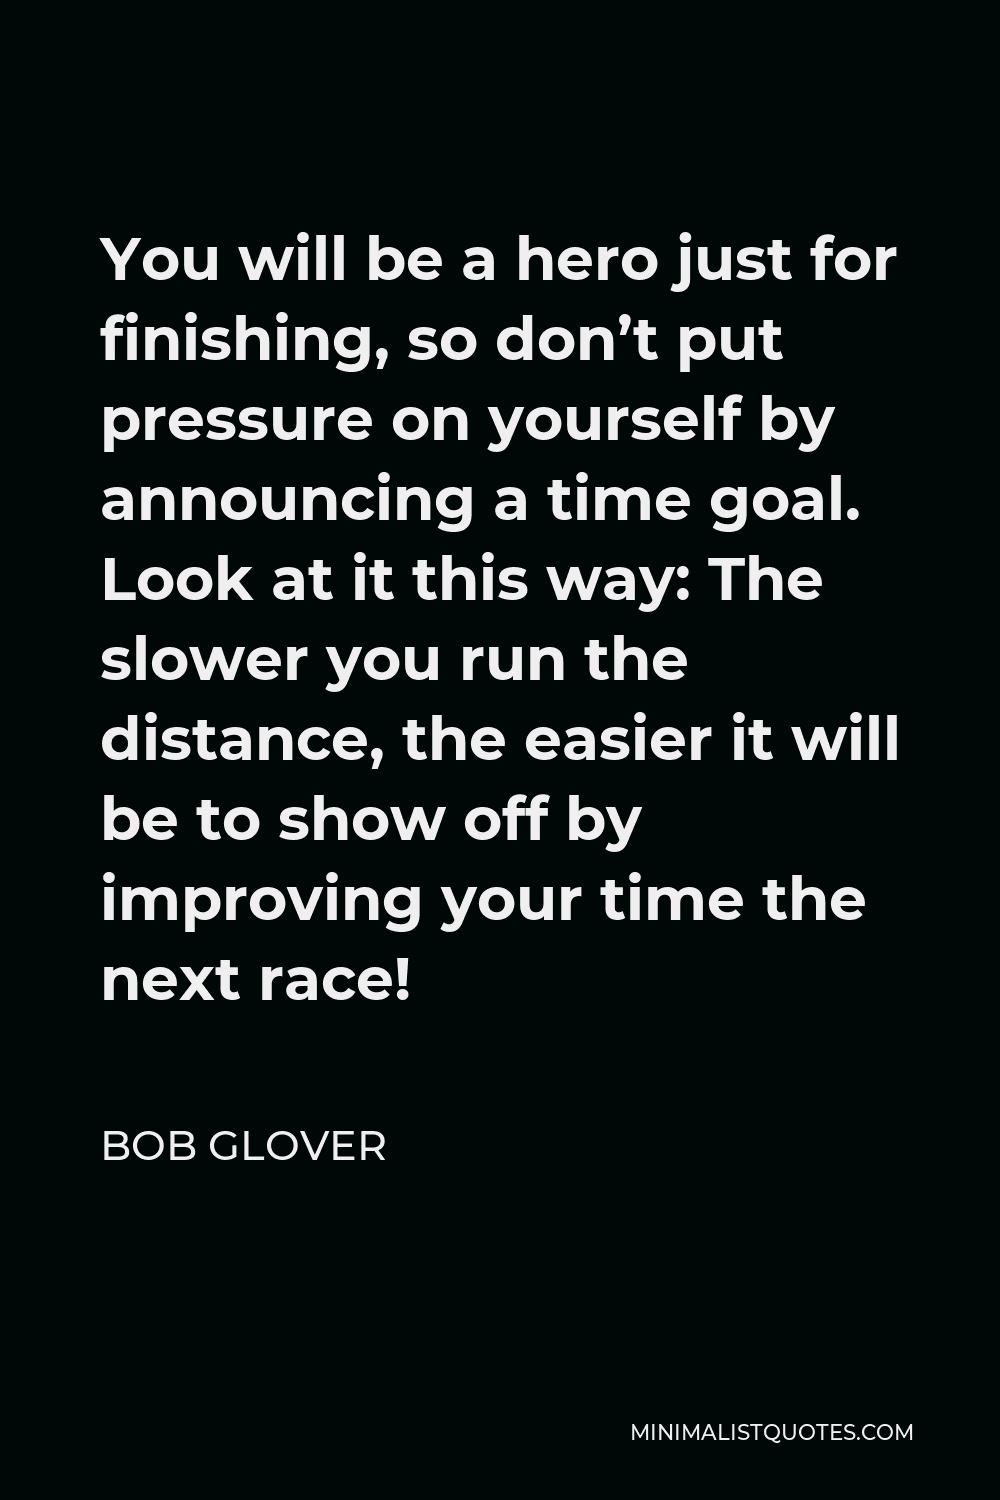 Bob Glover Quote - You will be a hero just for finishing, so don’t put pressure on yourself by announcing a time goal. Look at it this way: The slower you run the distance, the easier it will be to show off by improving your time the next race!